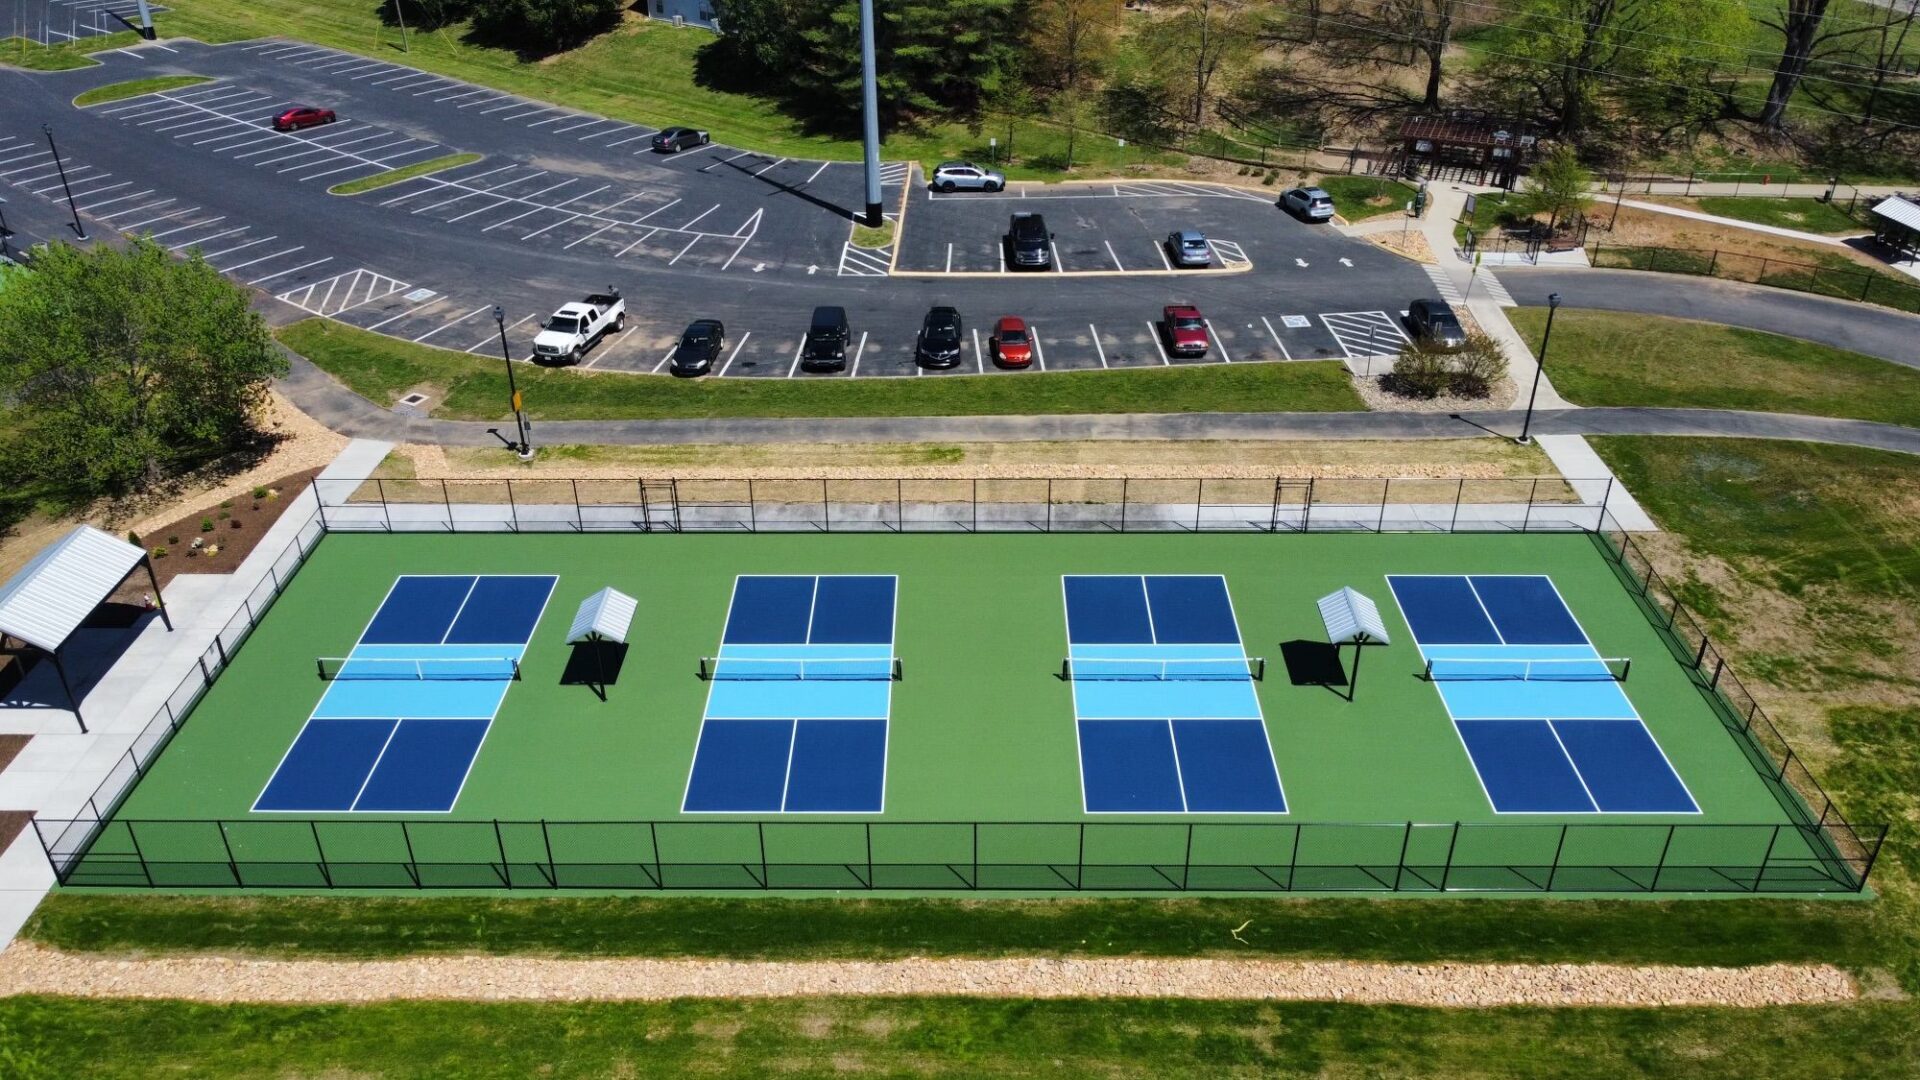 A tennis court with many blue and white tennis courts.